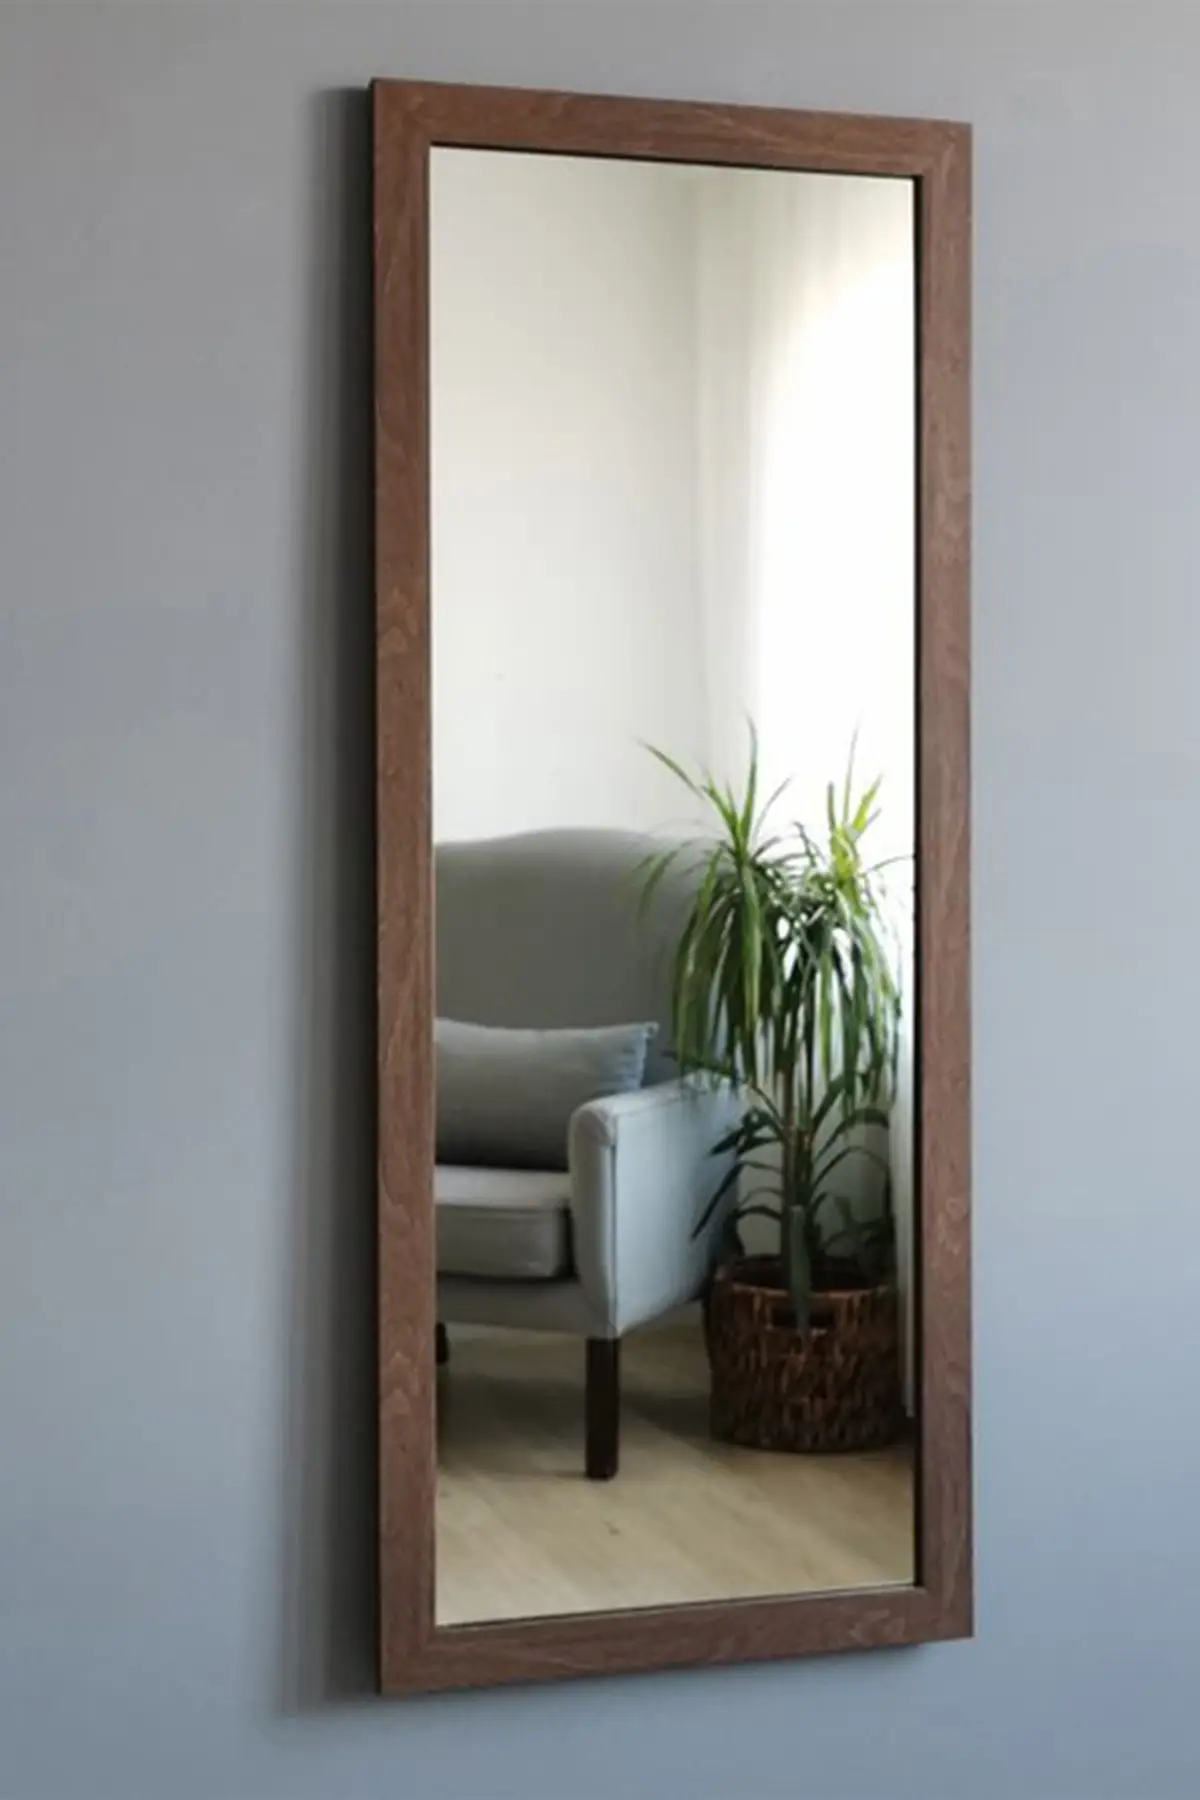 Decorative Full Length Mirror Living Room Office Size Mirror 45x110cm Bathroom Wall Room Home Design Large Gymnastics Makeup mounted Body